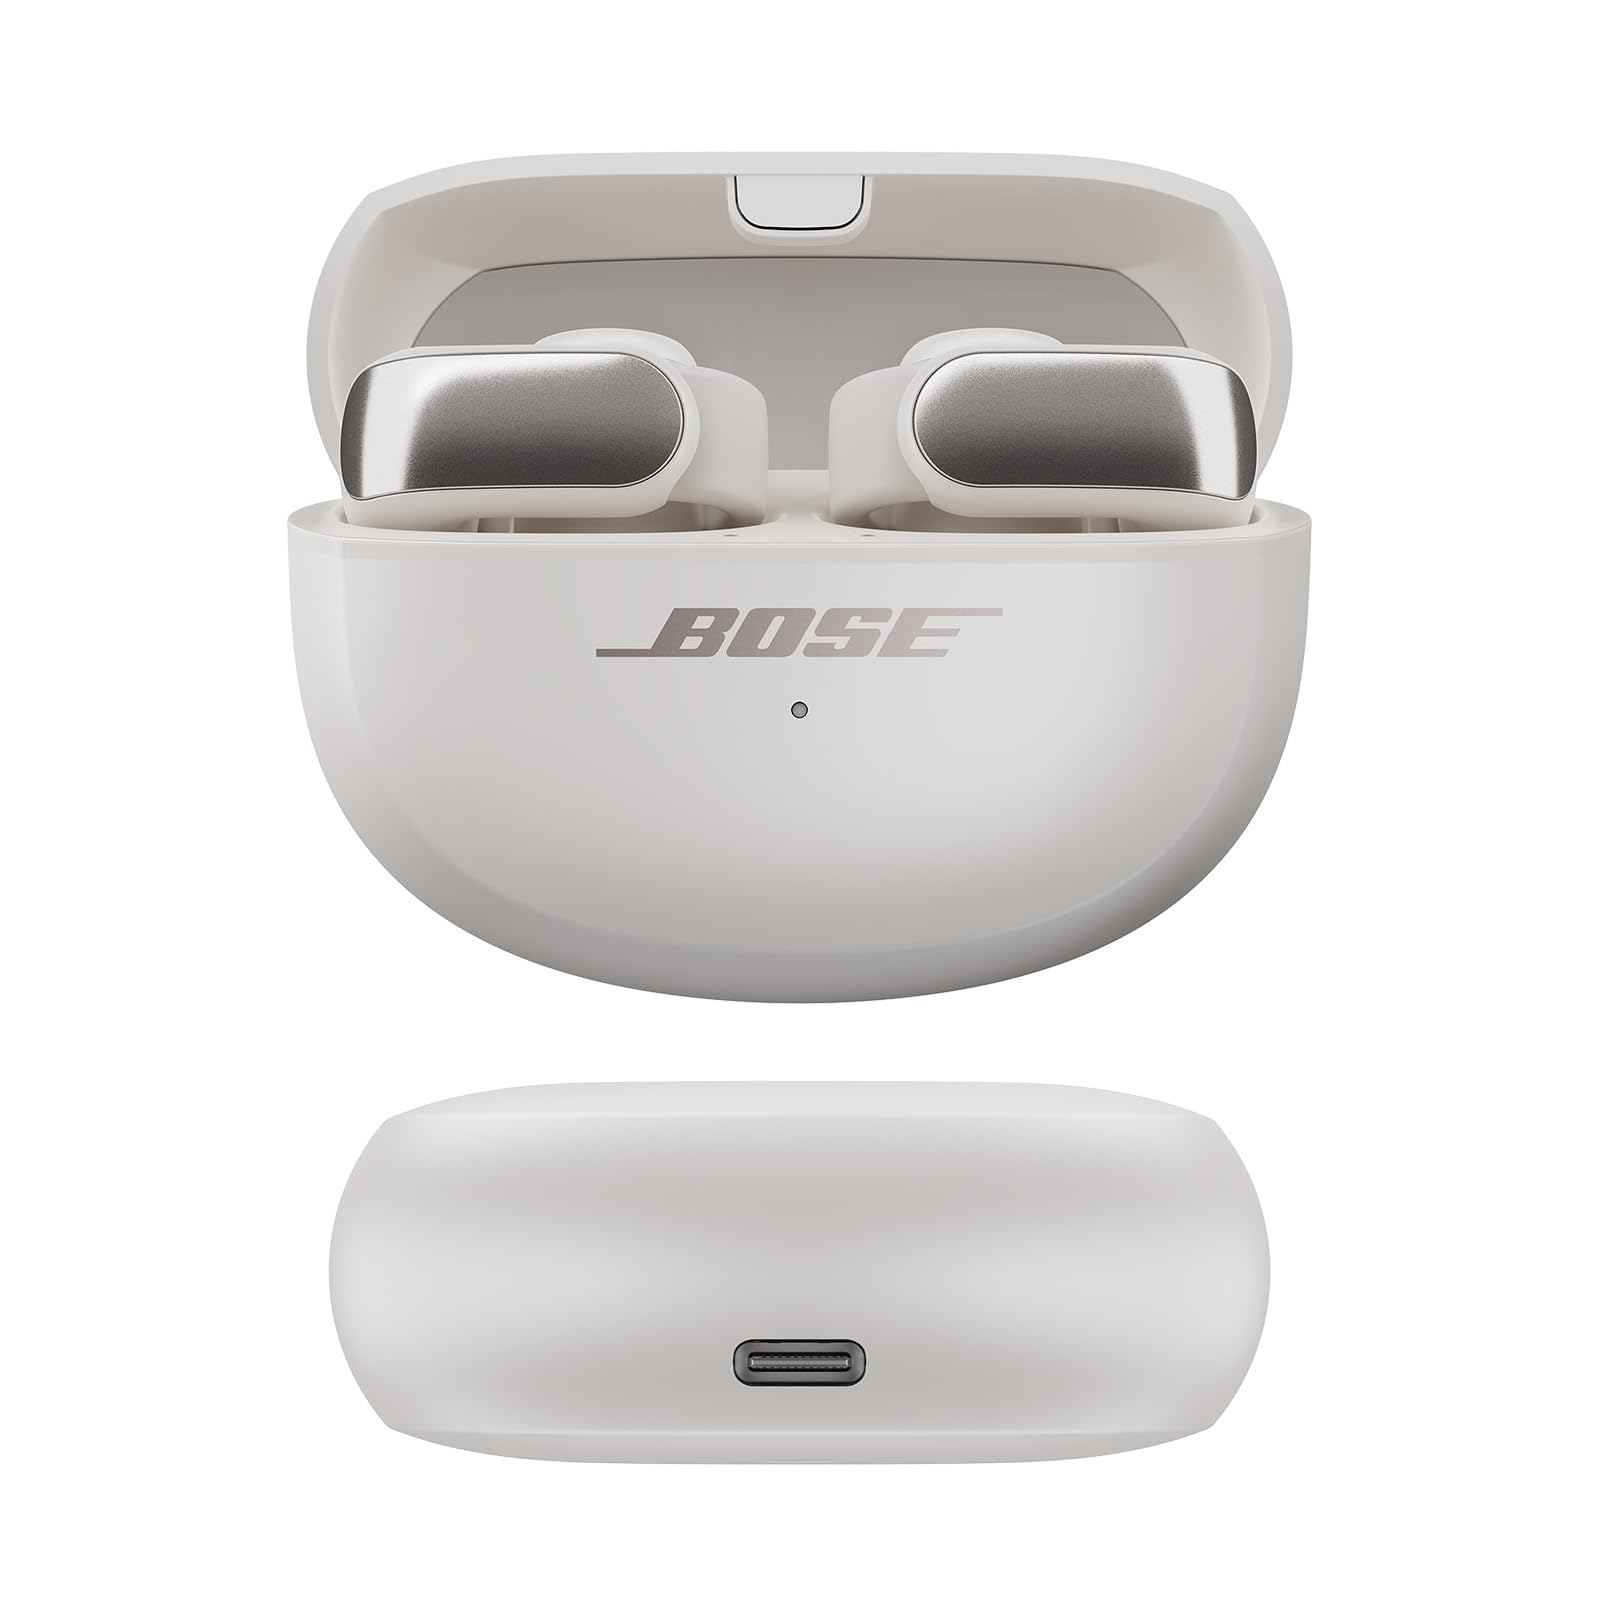 NEW Bose Ultra Open Earbuds with OpenAudio Technology, Open Ear Wireless Earbuds, Up to 48 Hours of Battery Life, White Smoke